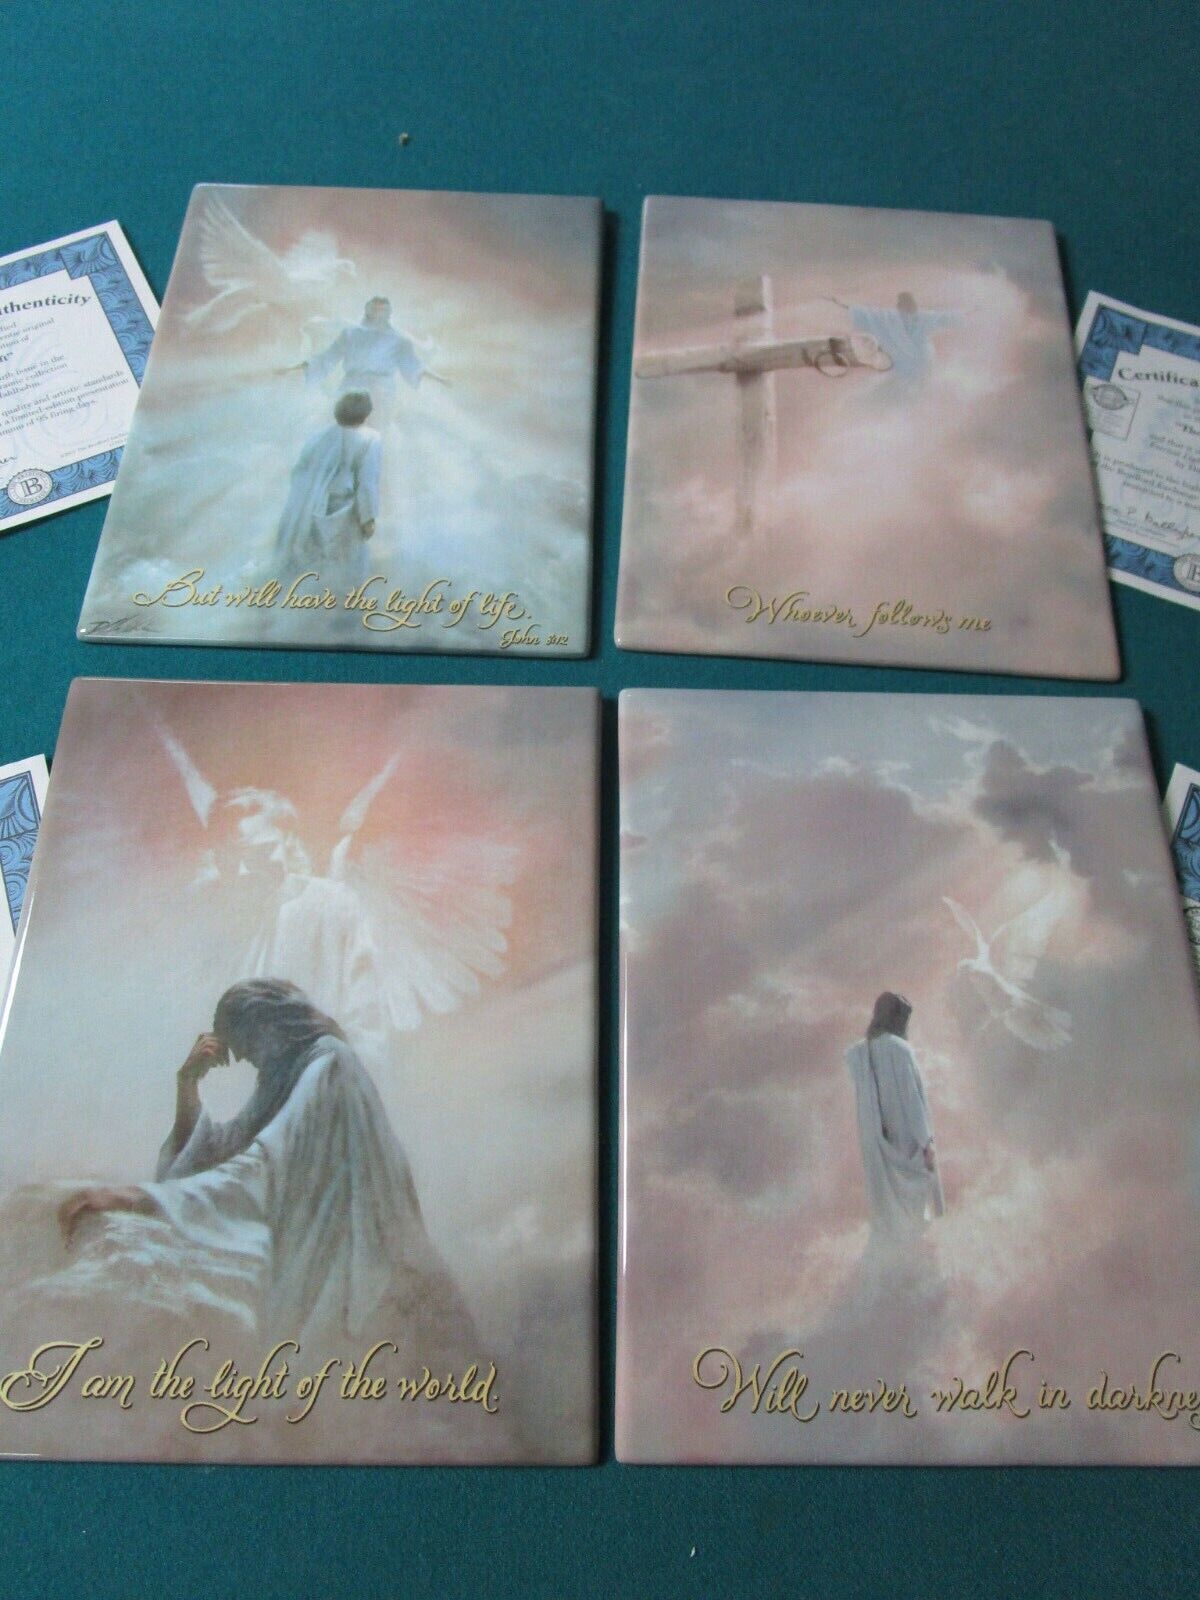 Primary image for DANNY HAHLBOLM ETERNAL LIFE" ART WORK COLLECTOR TILES PLAQUES 9 X 7" NIB